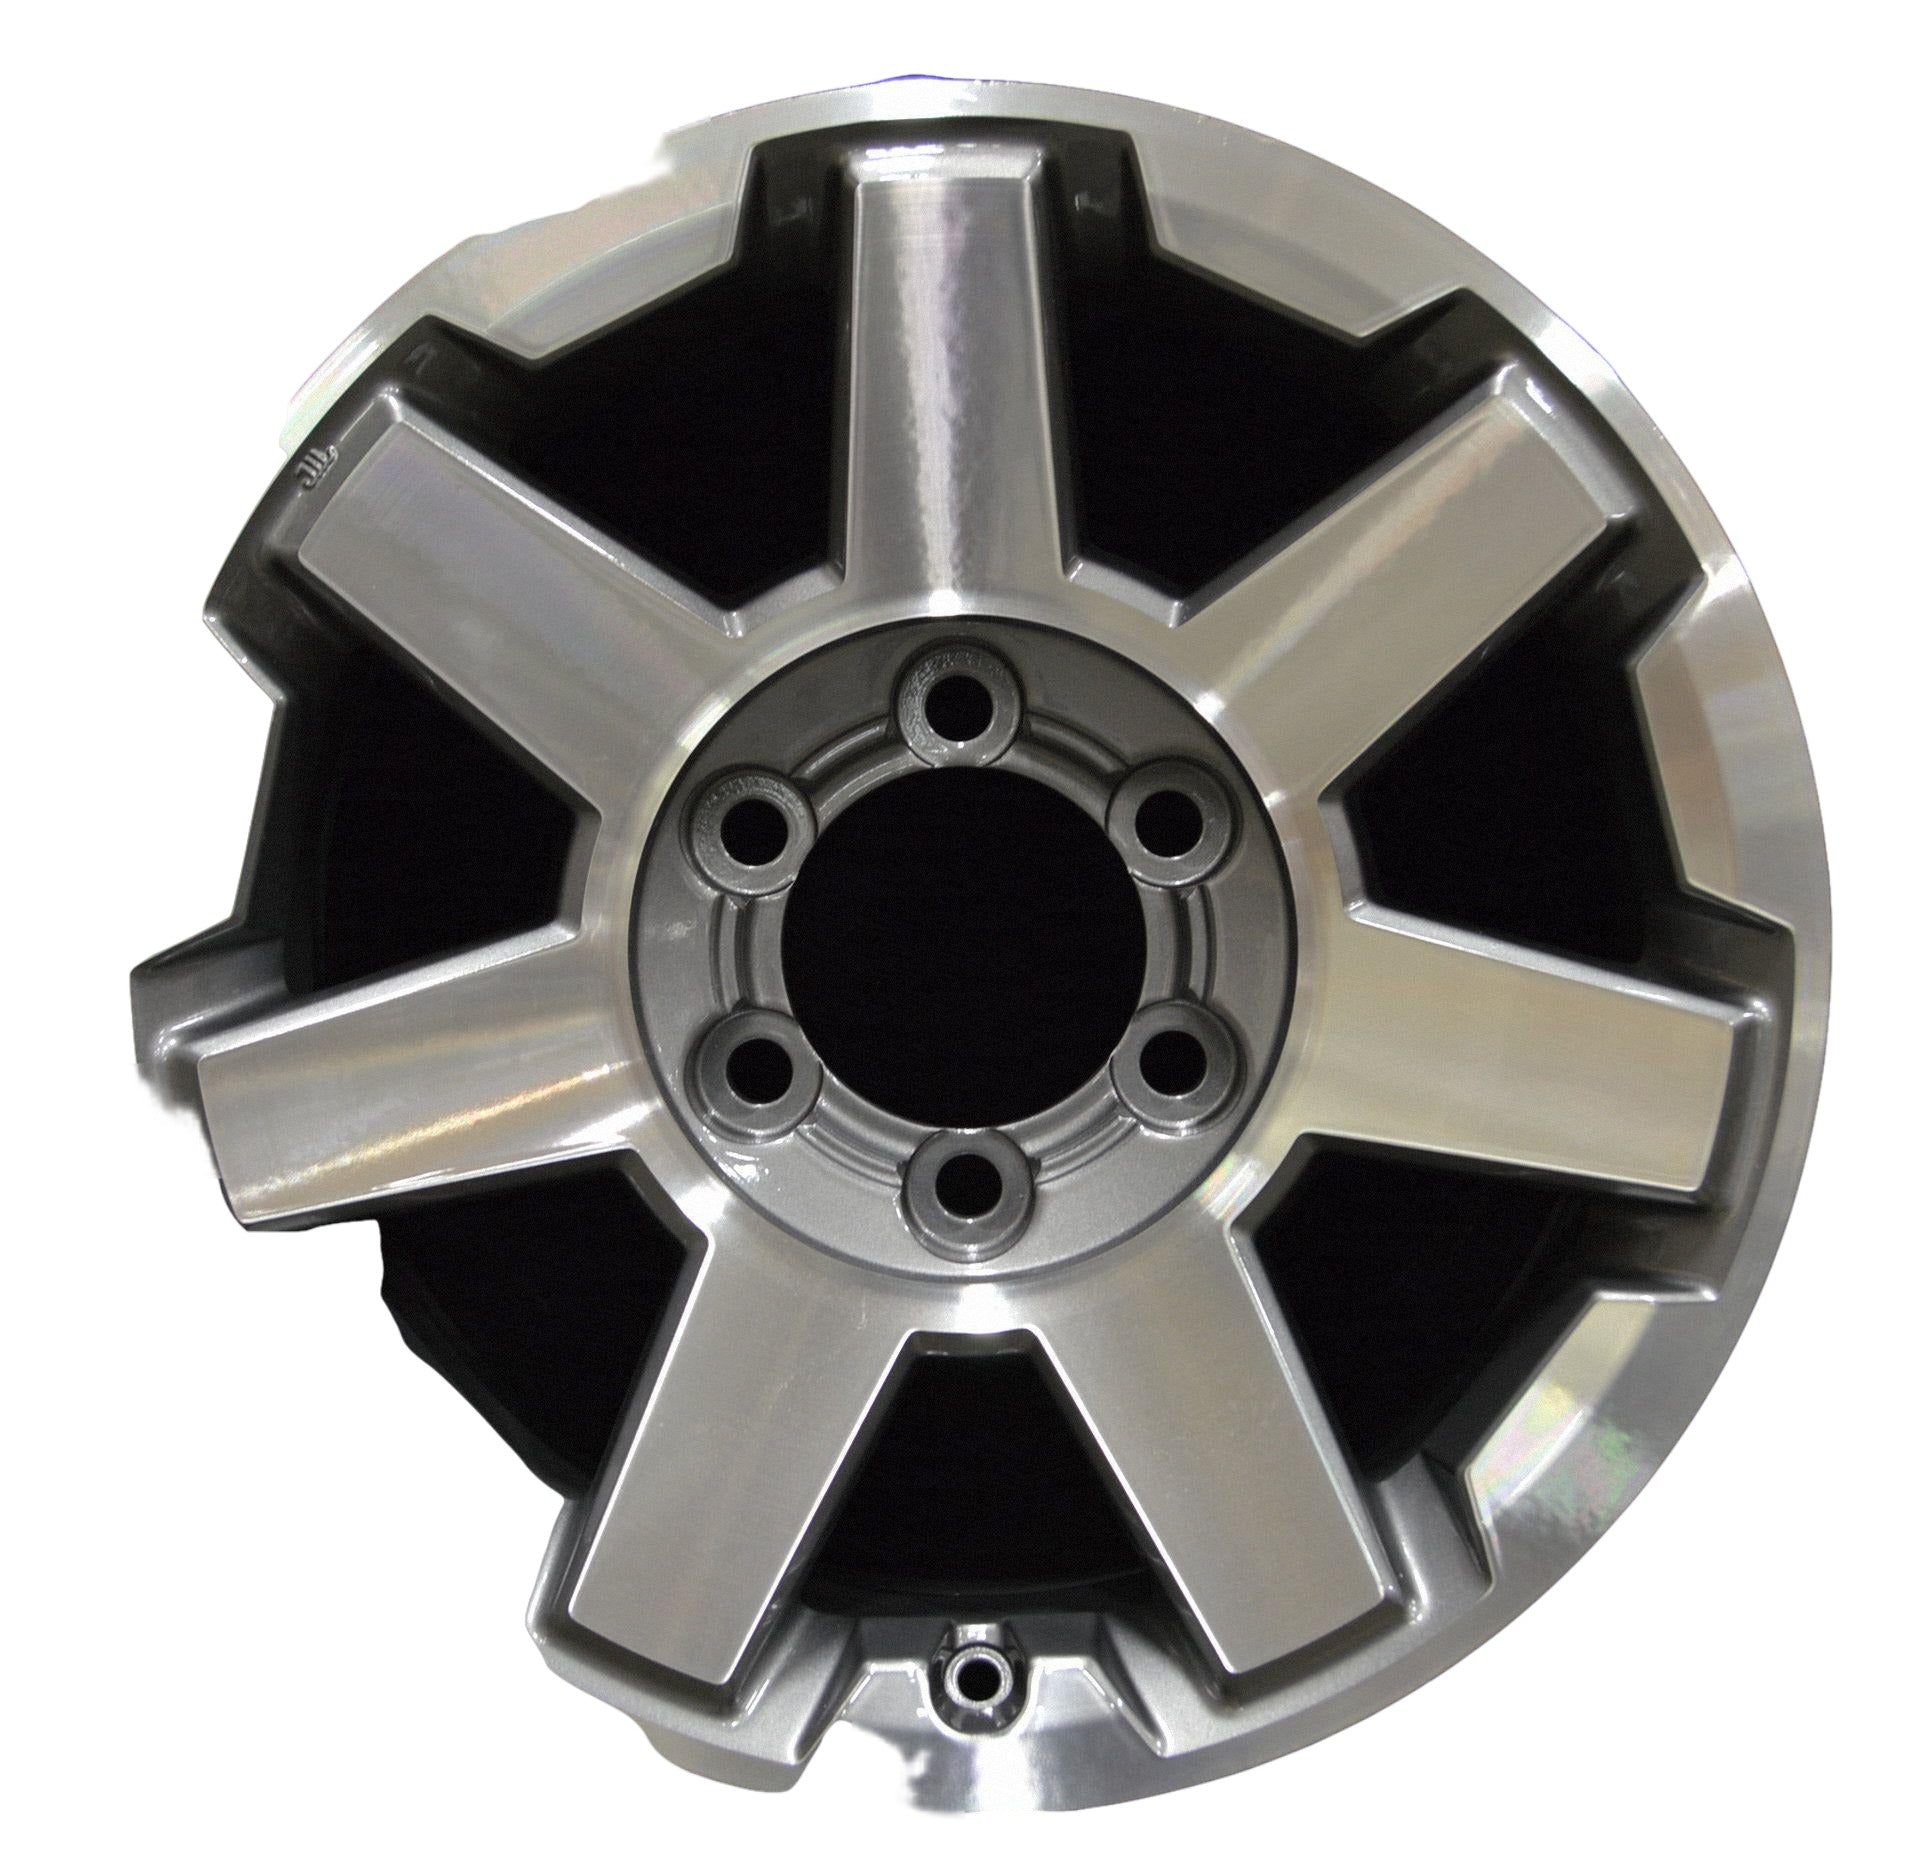 Toyota 4 Runner  2014, 2015, 2016, 2017, 2018 Factory OEM Car Wheel Size 17x7.5 Alloy WAO.75154.LC17.MA